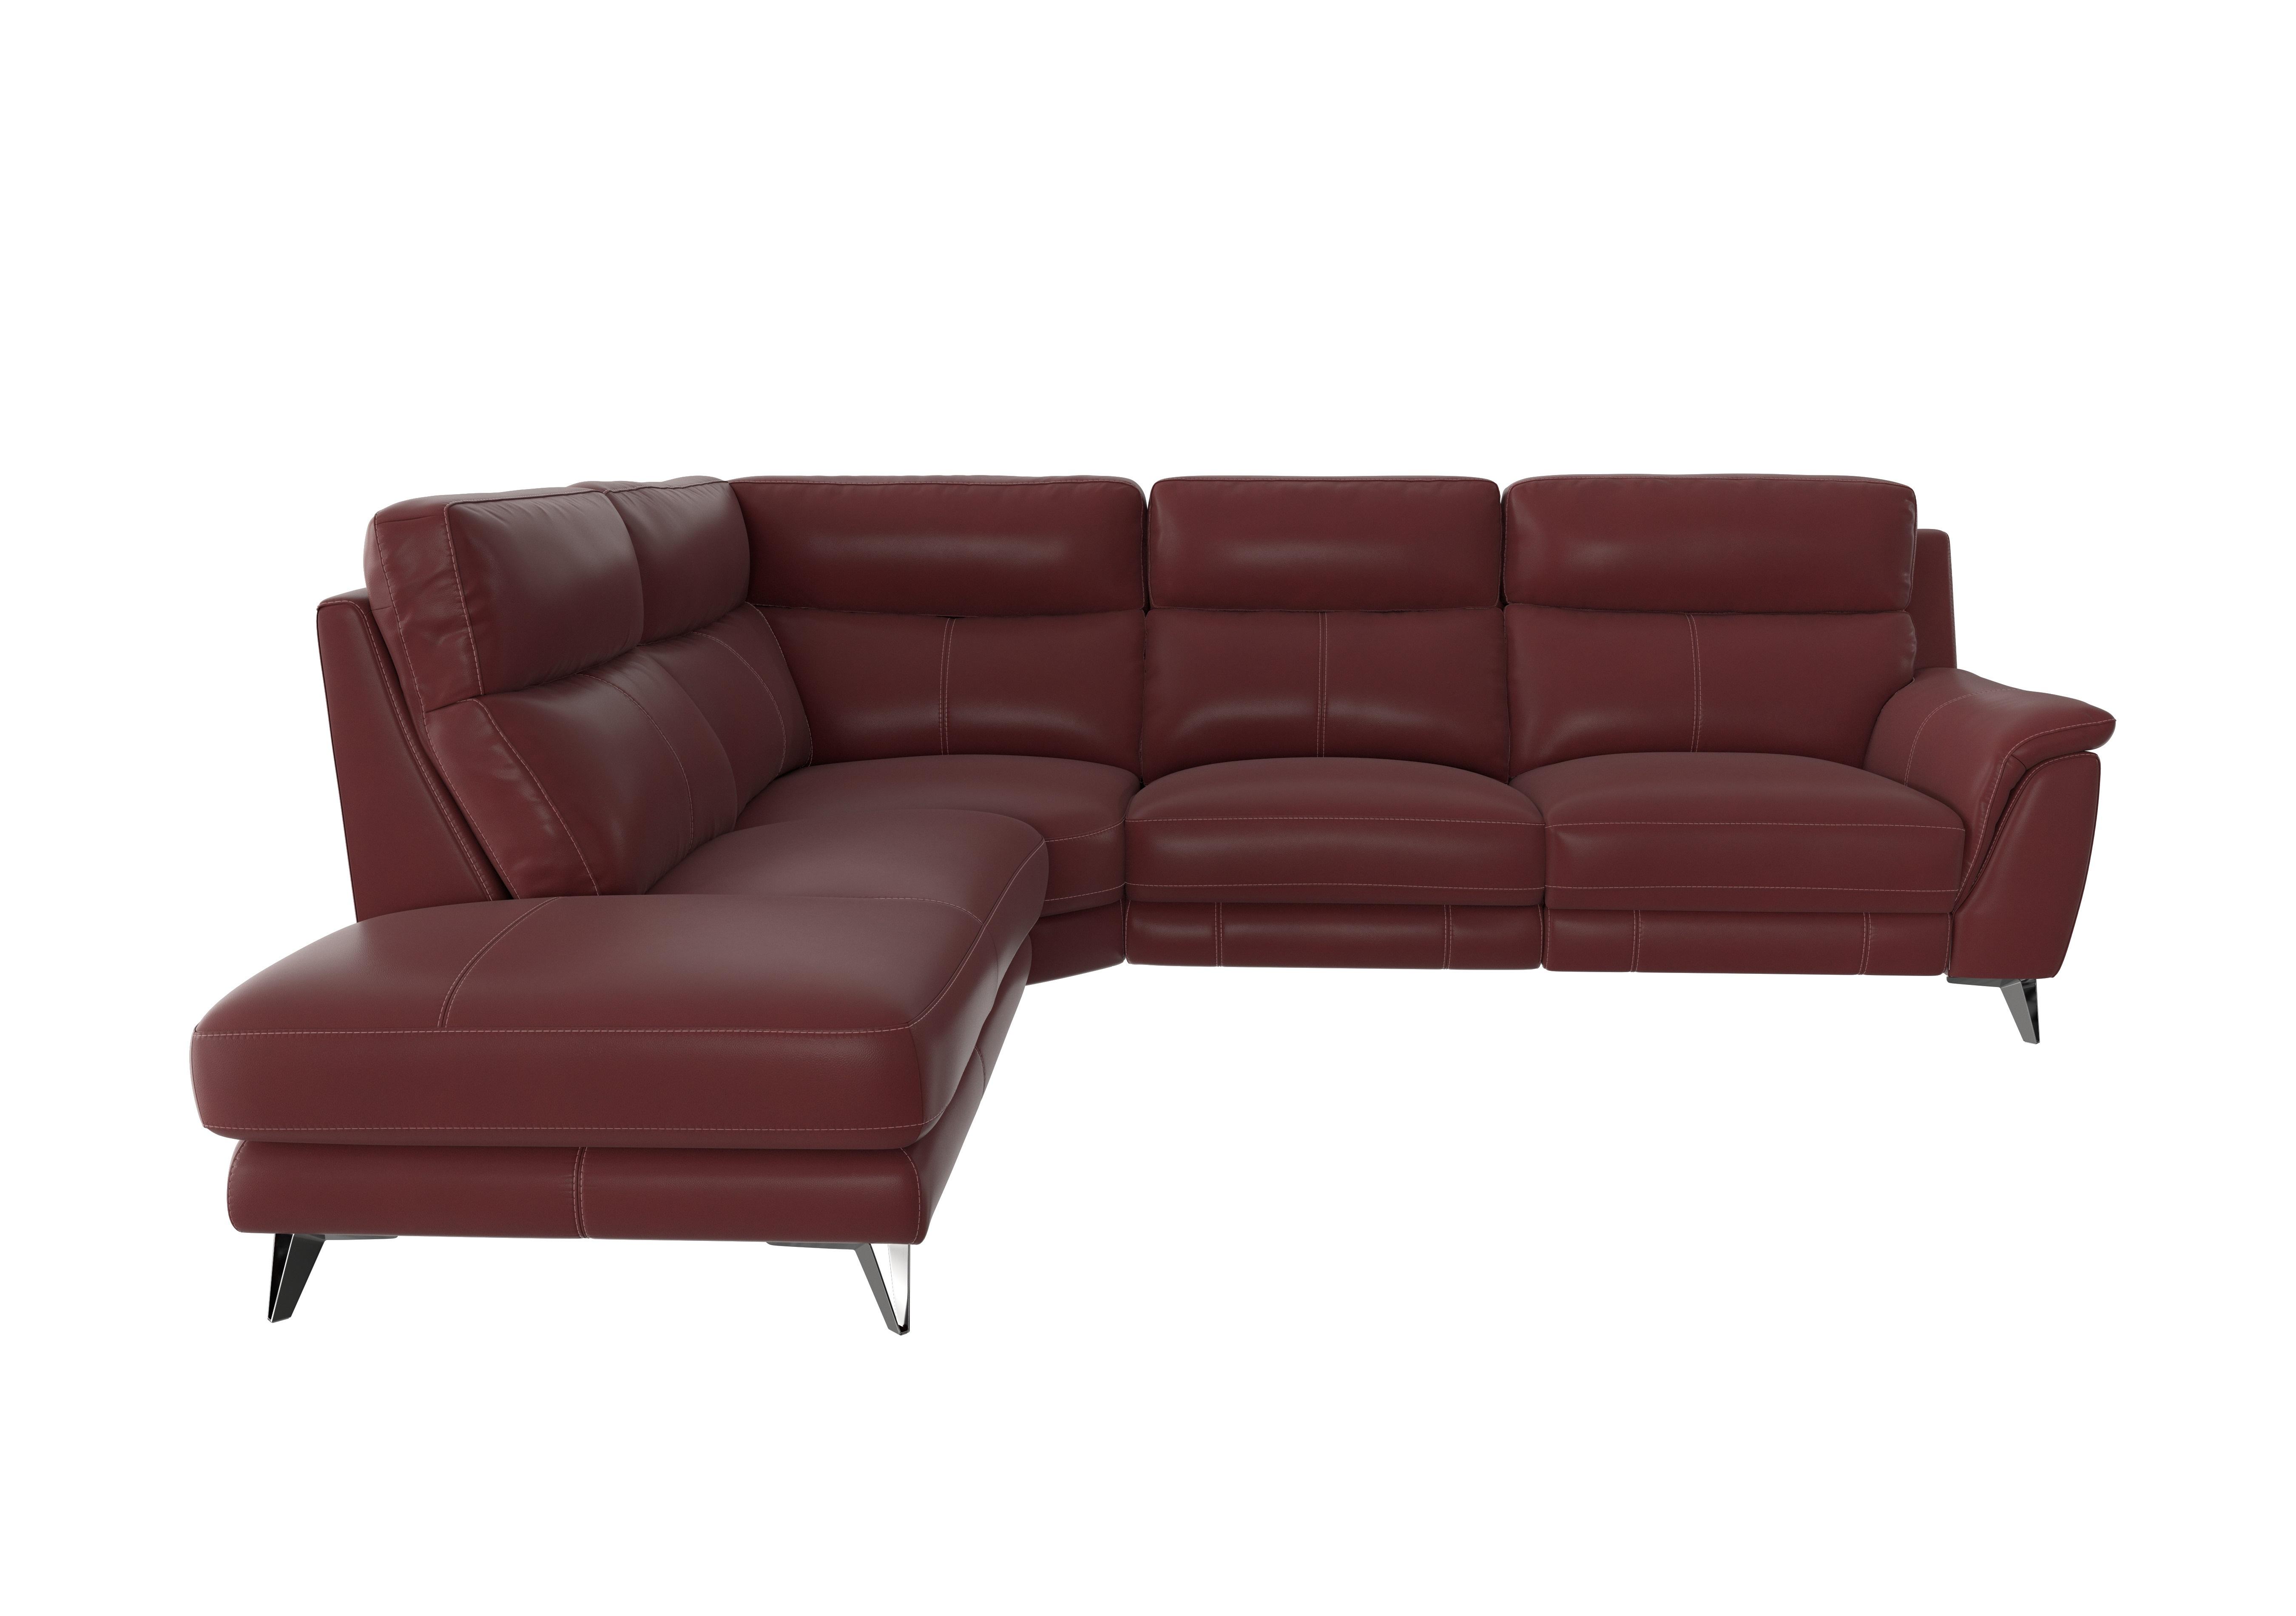 Contempo Chaise End Leather Sofa in Bv-035c Deep Red on Furniture Village